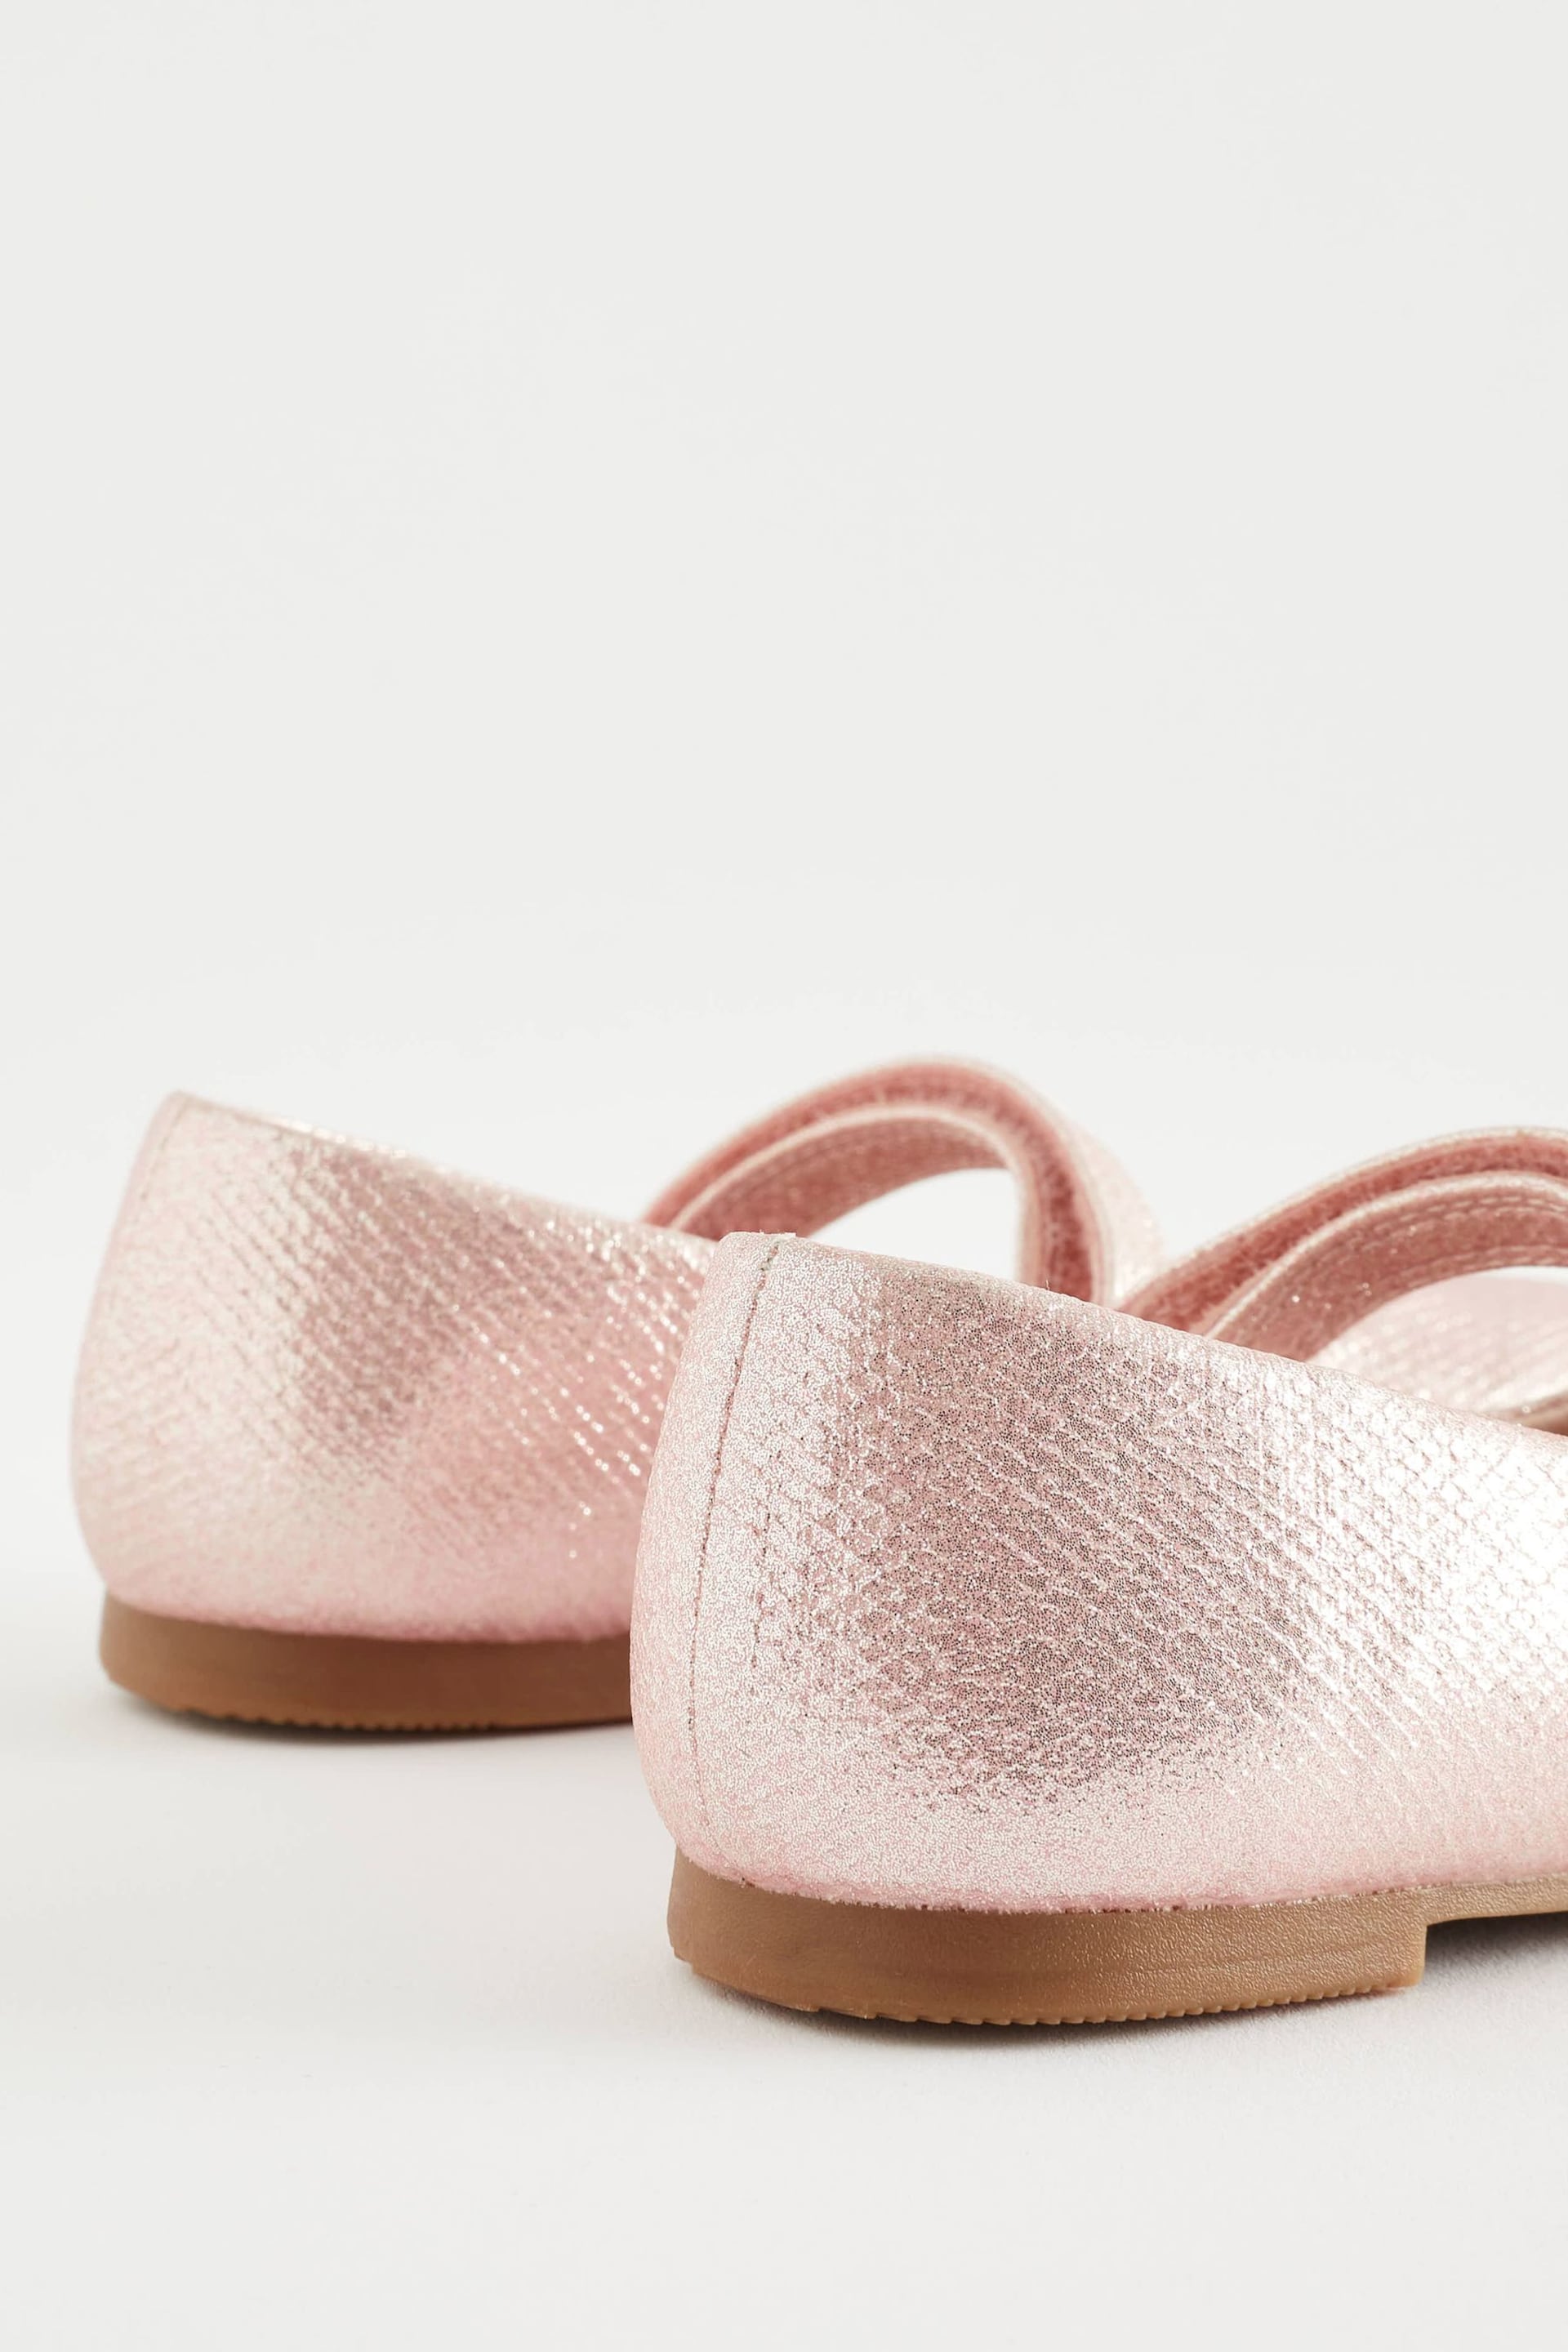 Pink Standard Fit (F) Mary Jane Occasion Shoes - Image 8 of 9